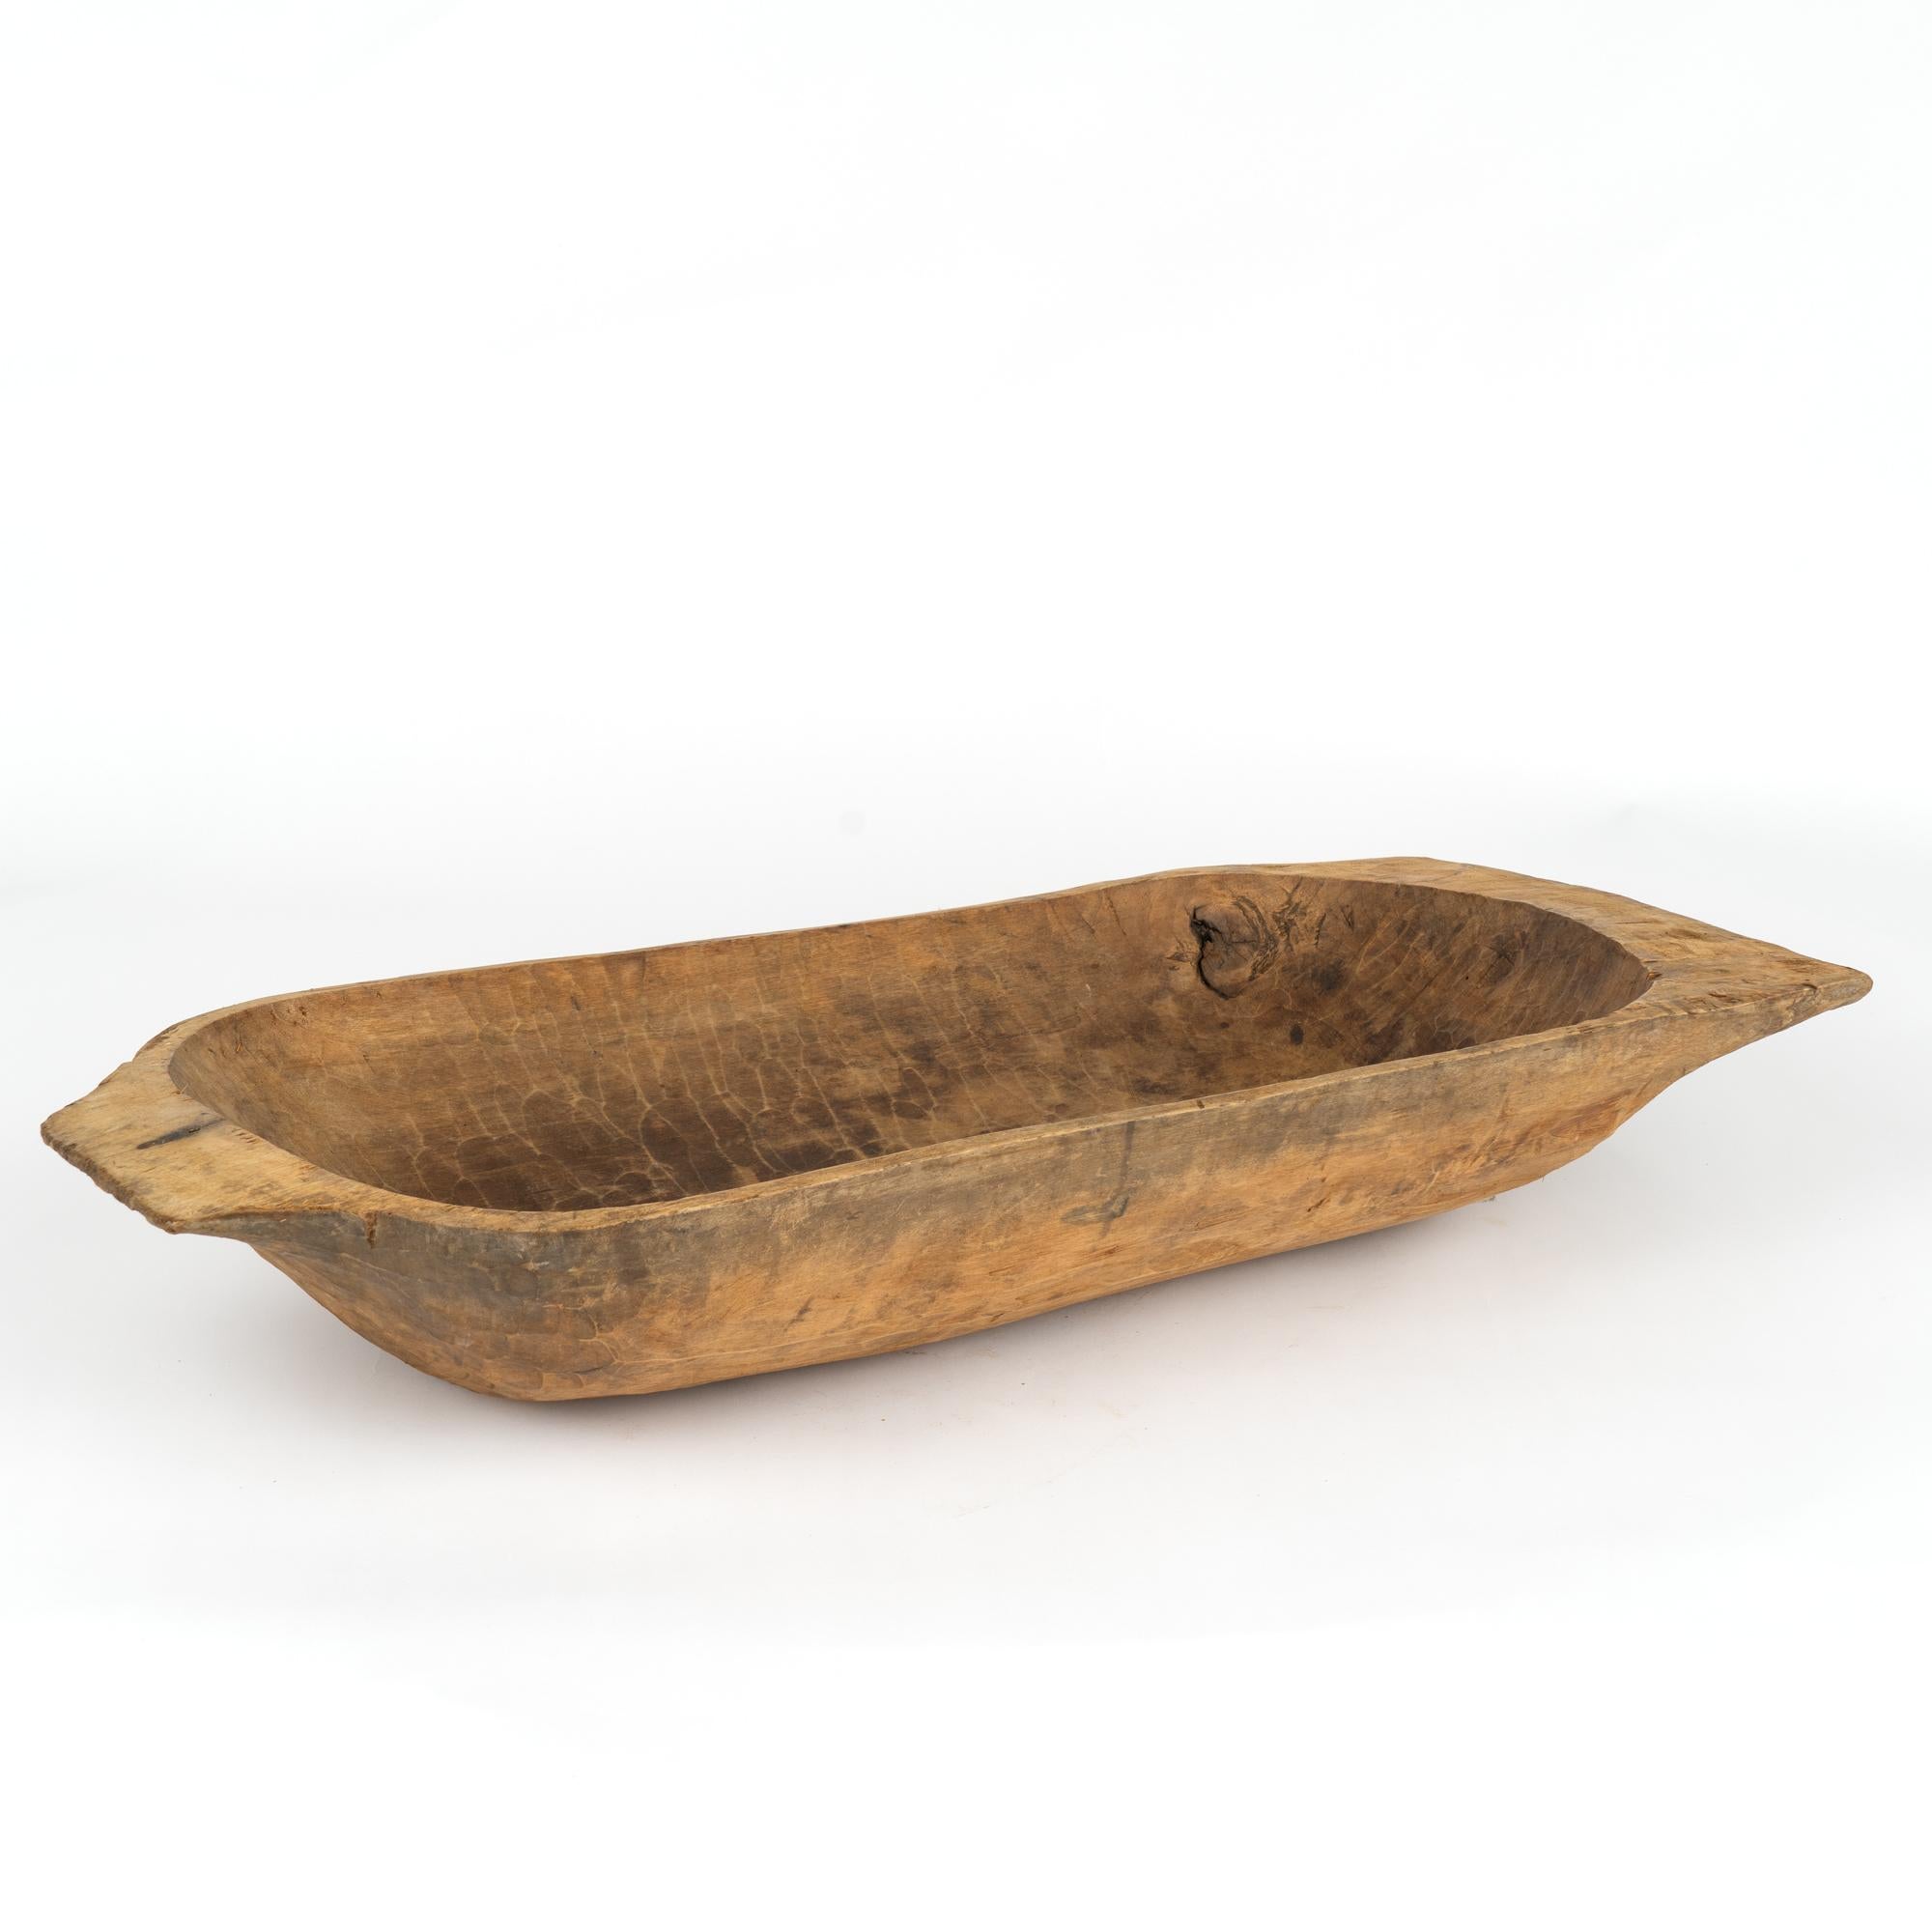 Antique hand hewn, European country dough bowl / trencher featuring a rounded rectangular shape, tapered base and handles.
Old cracks, nicks, stains, distress are reflective of generations of use. 
Waxed and ready to use as decorative bowl.

With